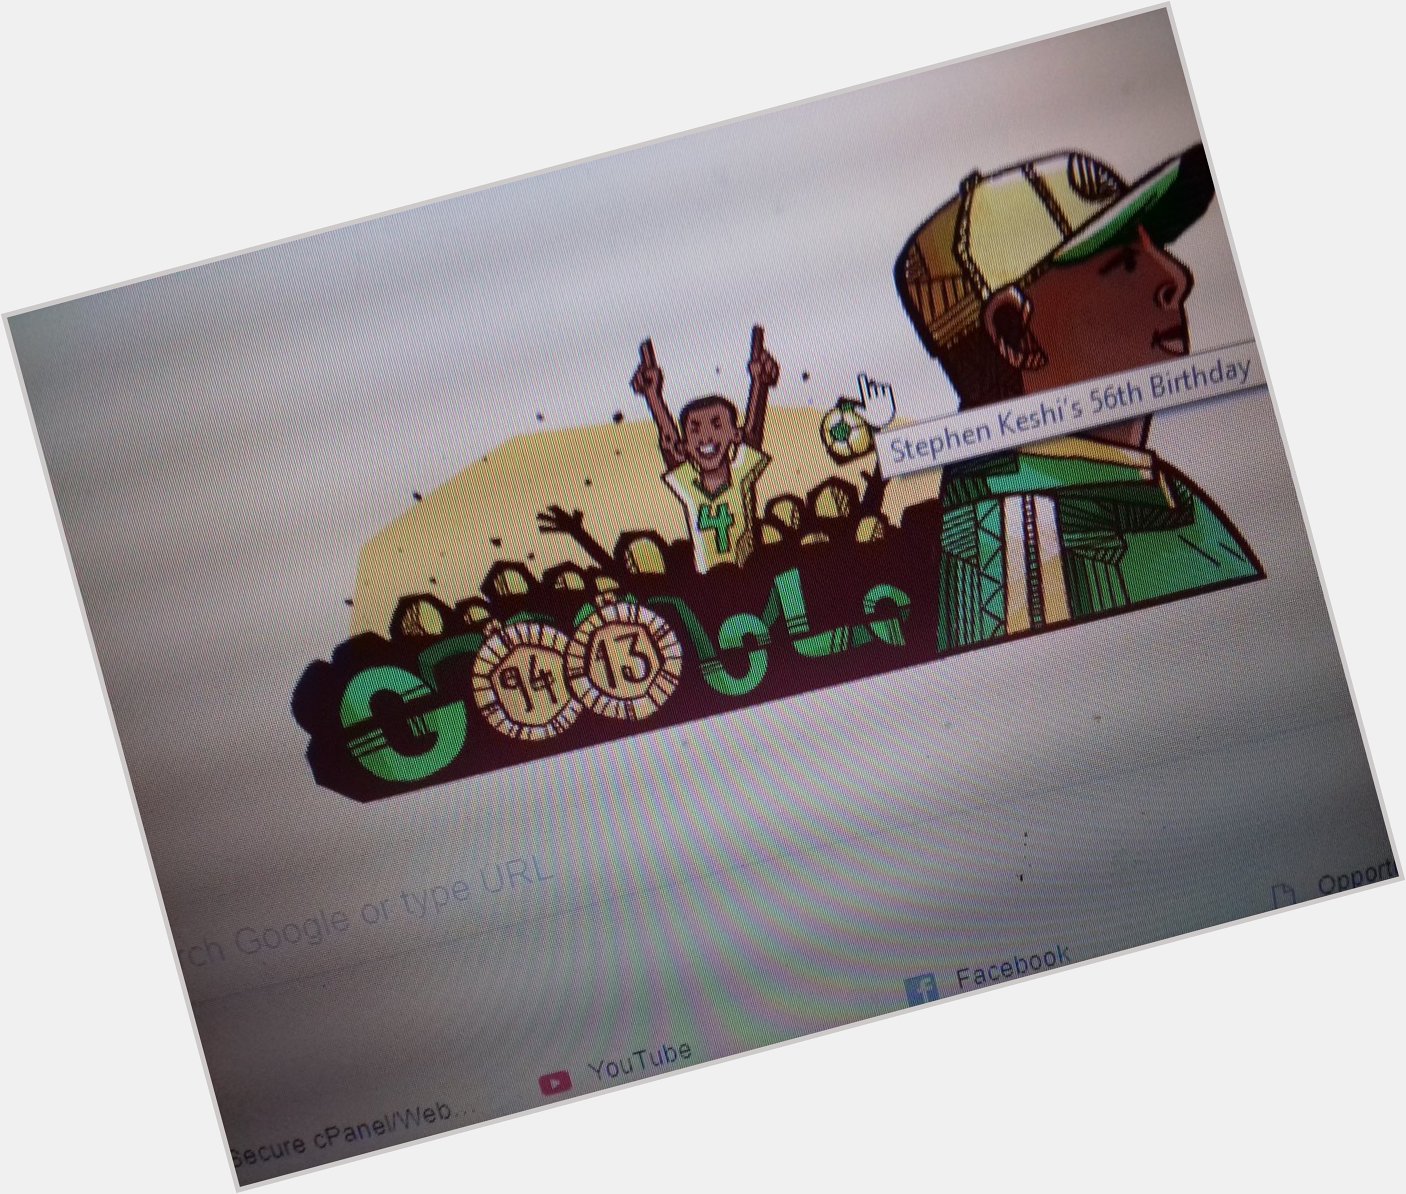 It is great to see that Google remembers Stephen Keshi on a day like this.Happy posthumous birthday Stephen Keshi 